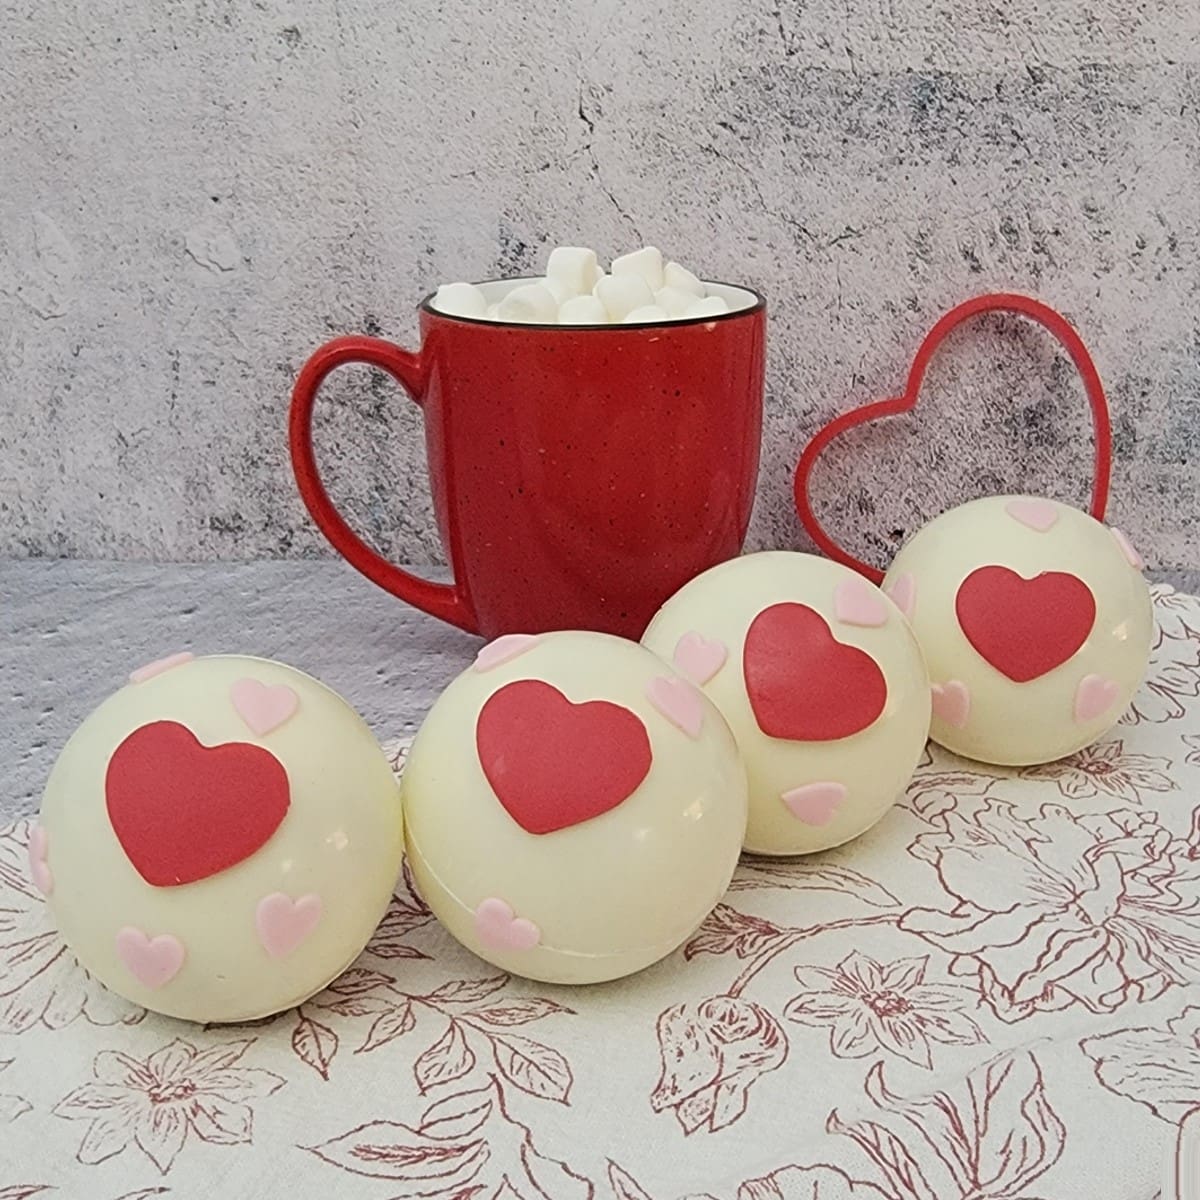 hot cocoa bombs for Valentine's day lined up in a row and one mug with hot chocolate made